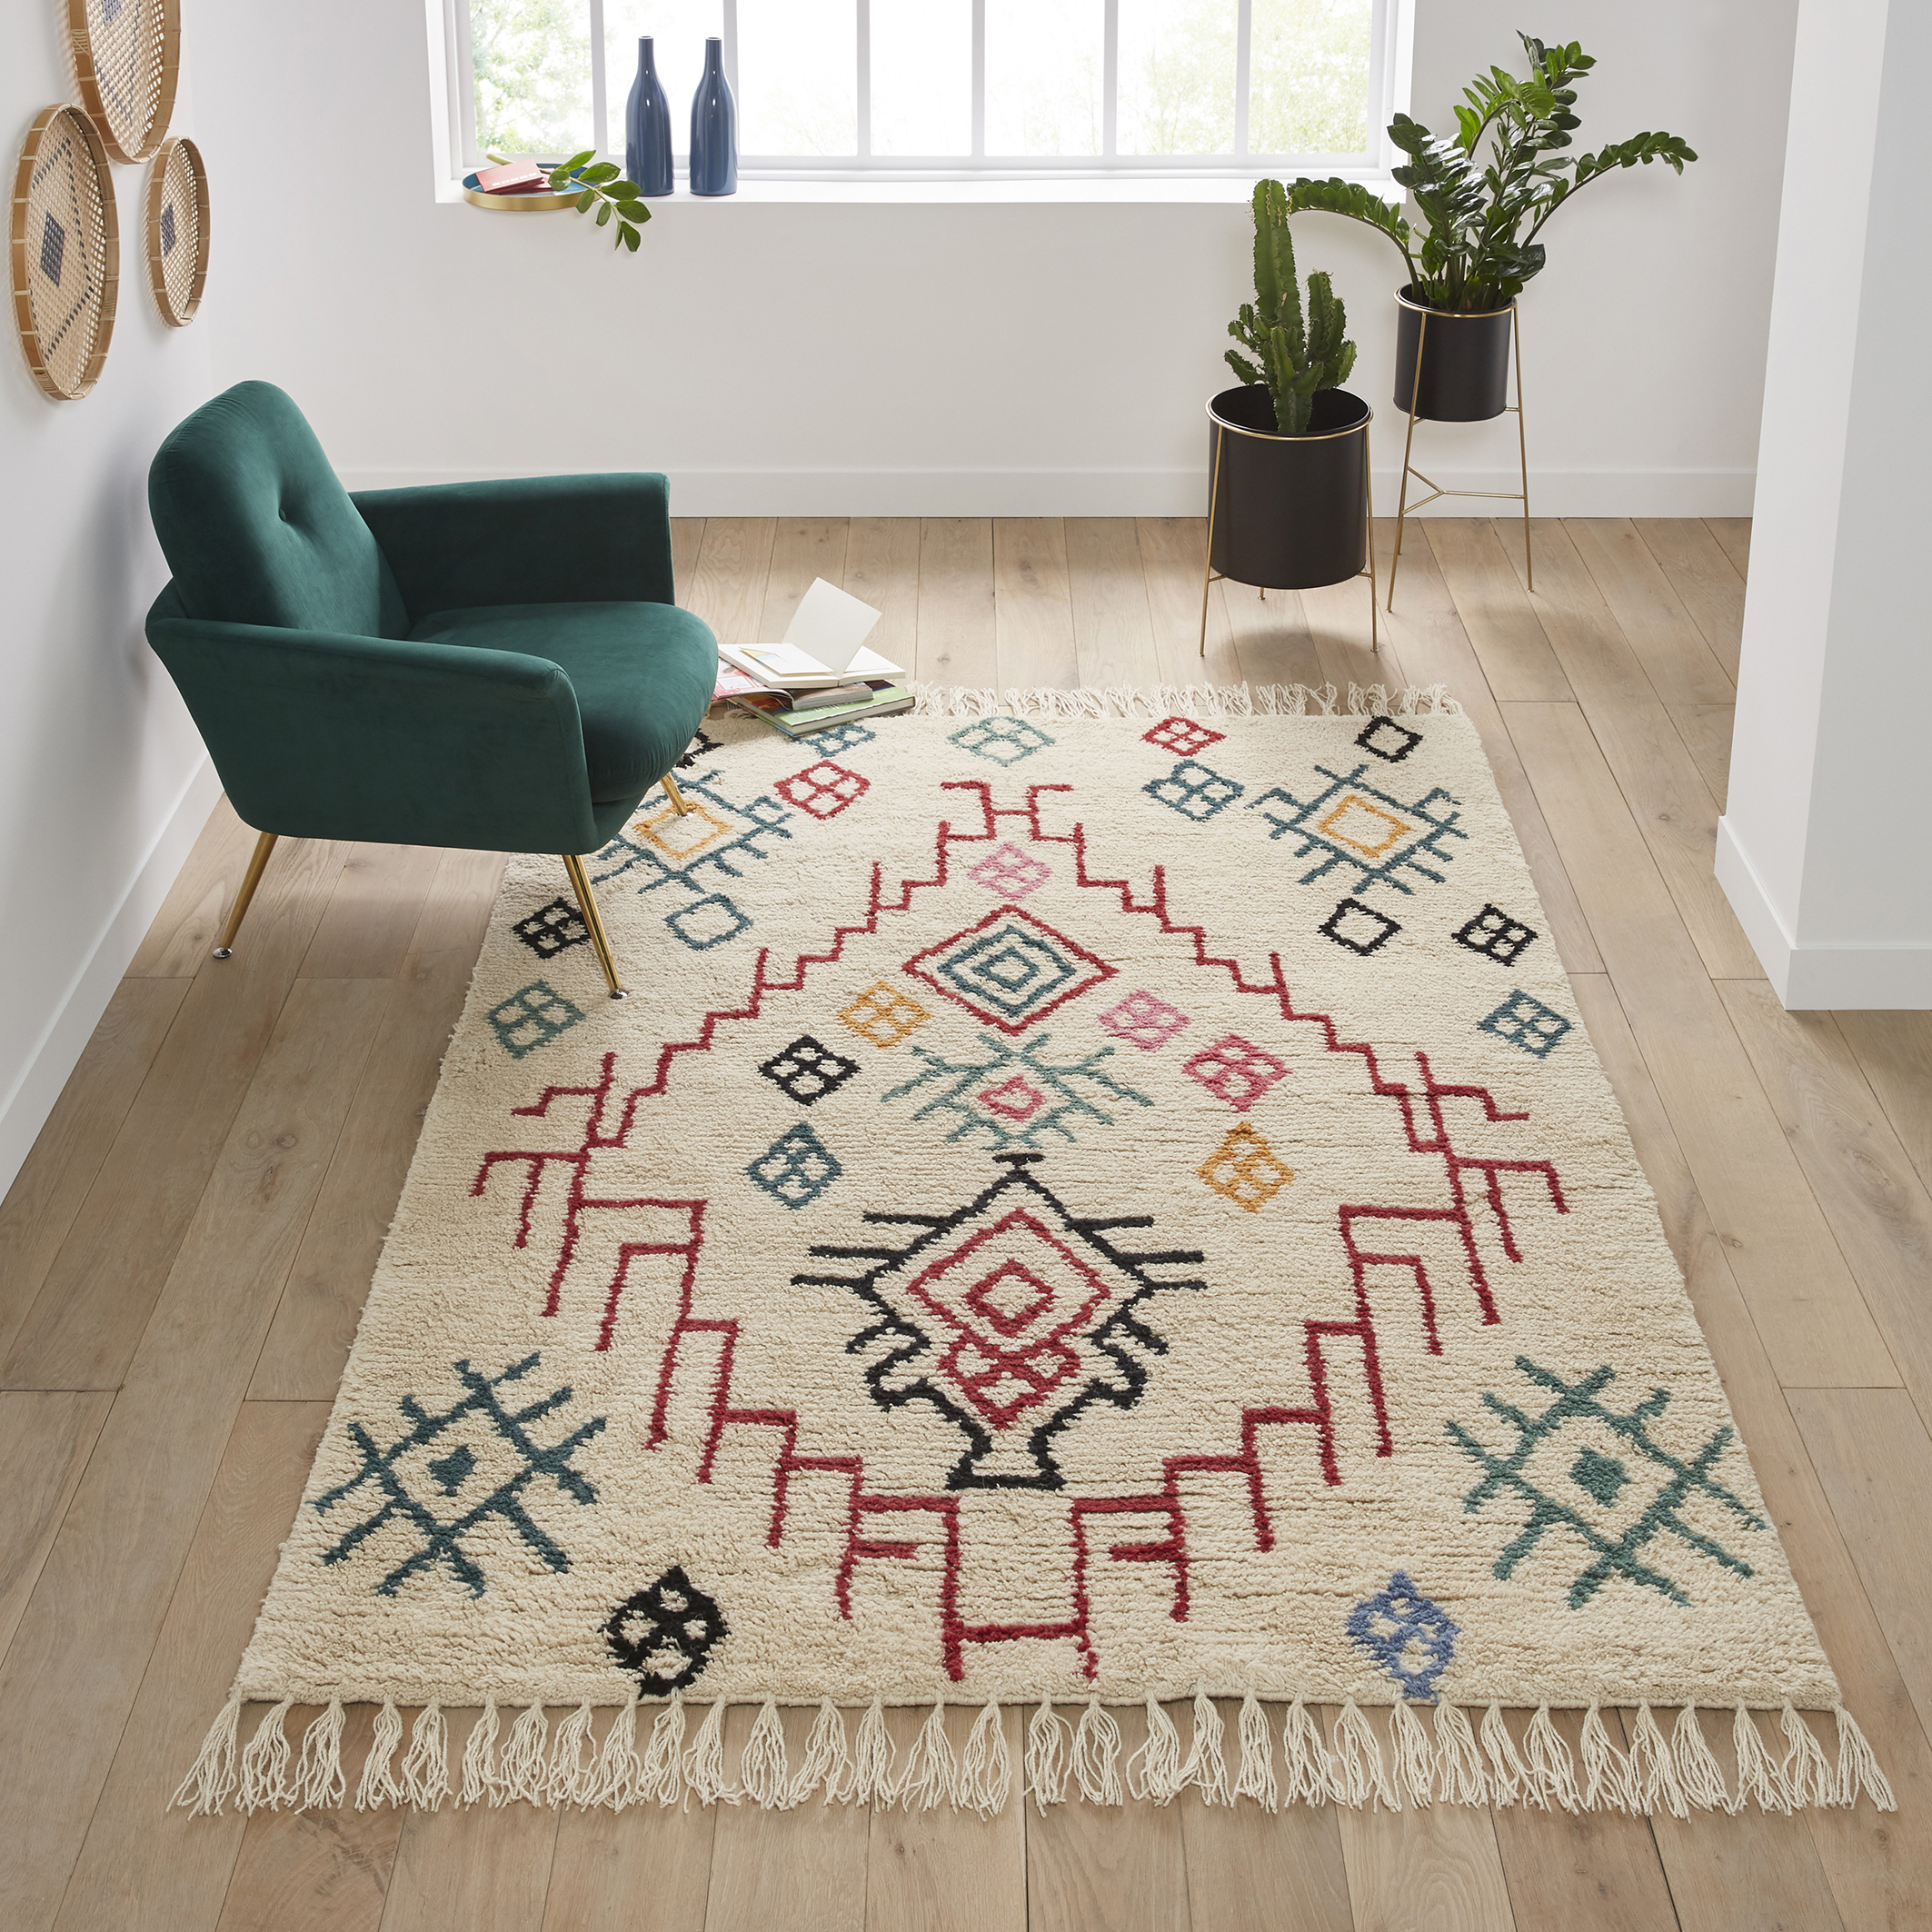 Adza Berber Style Fringed Wool Rug, Small Area Rugs 2×3